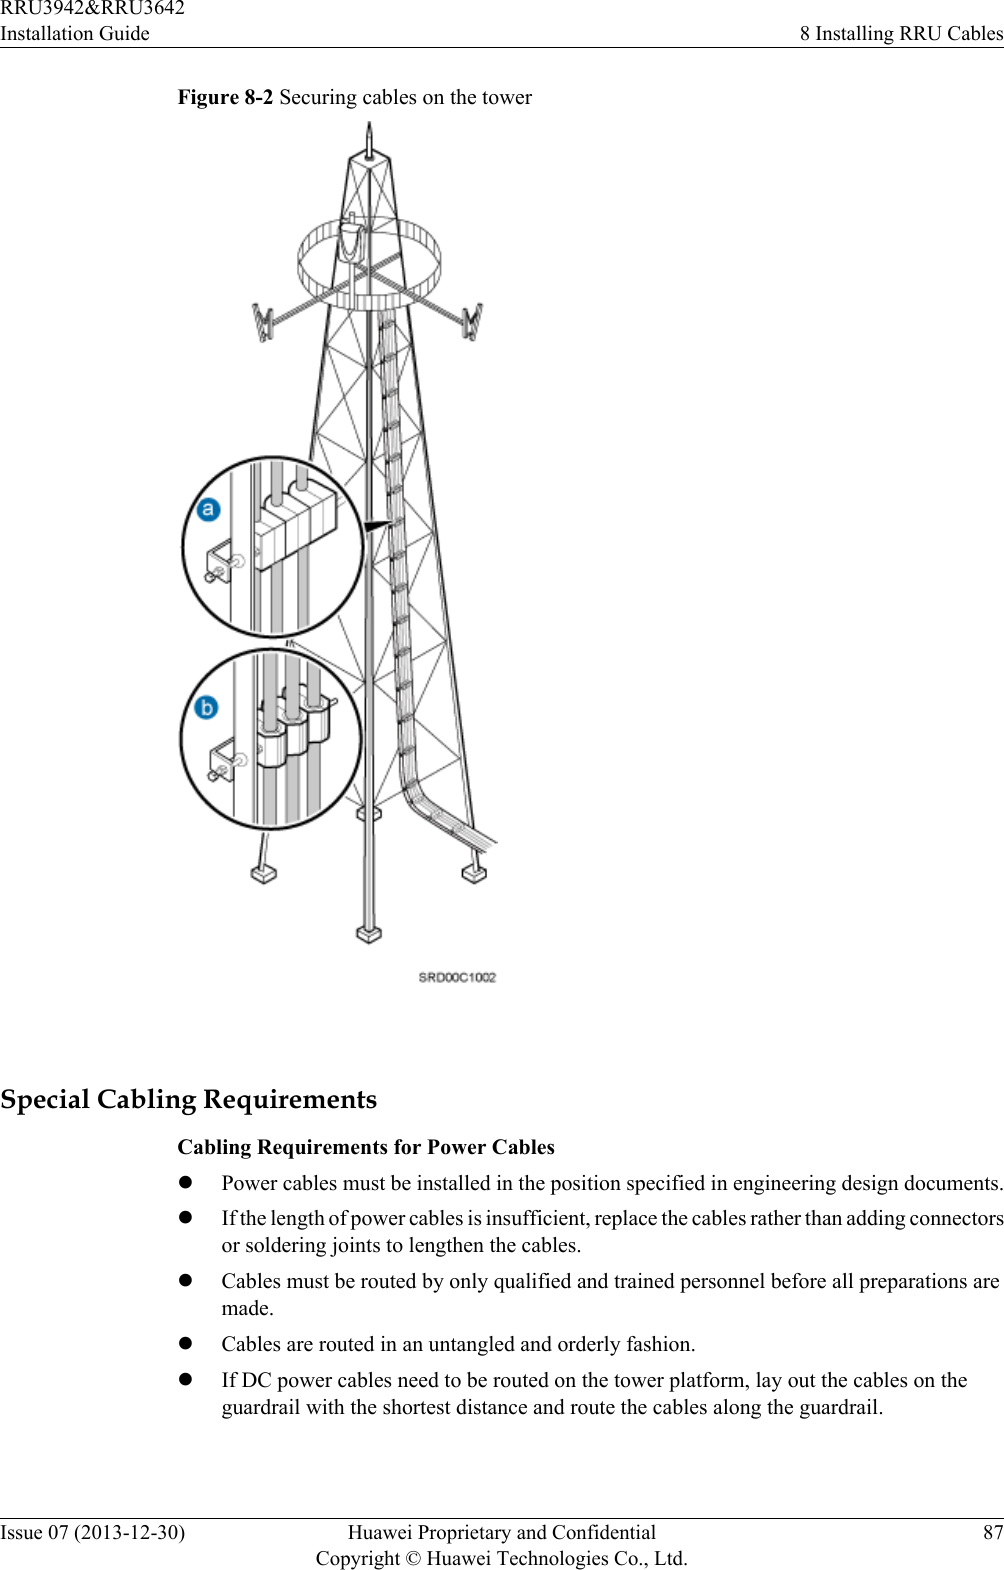 Figure 8-2 Securing cables on the tower Special Cabling RequirementsCabling Requirements for Power CableslPower cables must be installed in the position specified in engineering design documents.lIf the length of power cables is insufficient, replace the cables rather than adding connectorsor soldering joints to lengthen the cables.lCables must be routed by only qualified and trained personnel before all preparations aremade.lCables are routed in an untangled and orderly fashion.lIf DC power cables need to be routed on the tower platform, lay out the cables on theguardrail with the shortest distance and route the cables along the guardrail.RRU3942&amp;RRU3642Installation Guide 8 Installing RRU CablesIssue 07 (2013-12-30) Huawei Proprietary and ConfidentialCopyright © Huawei Technologies Co., Ltd.87